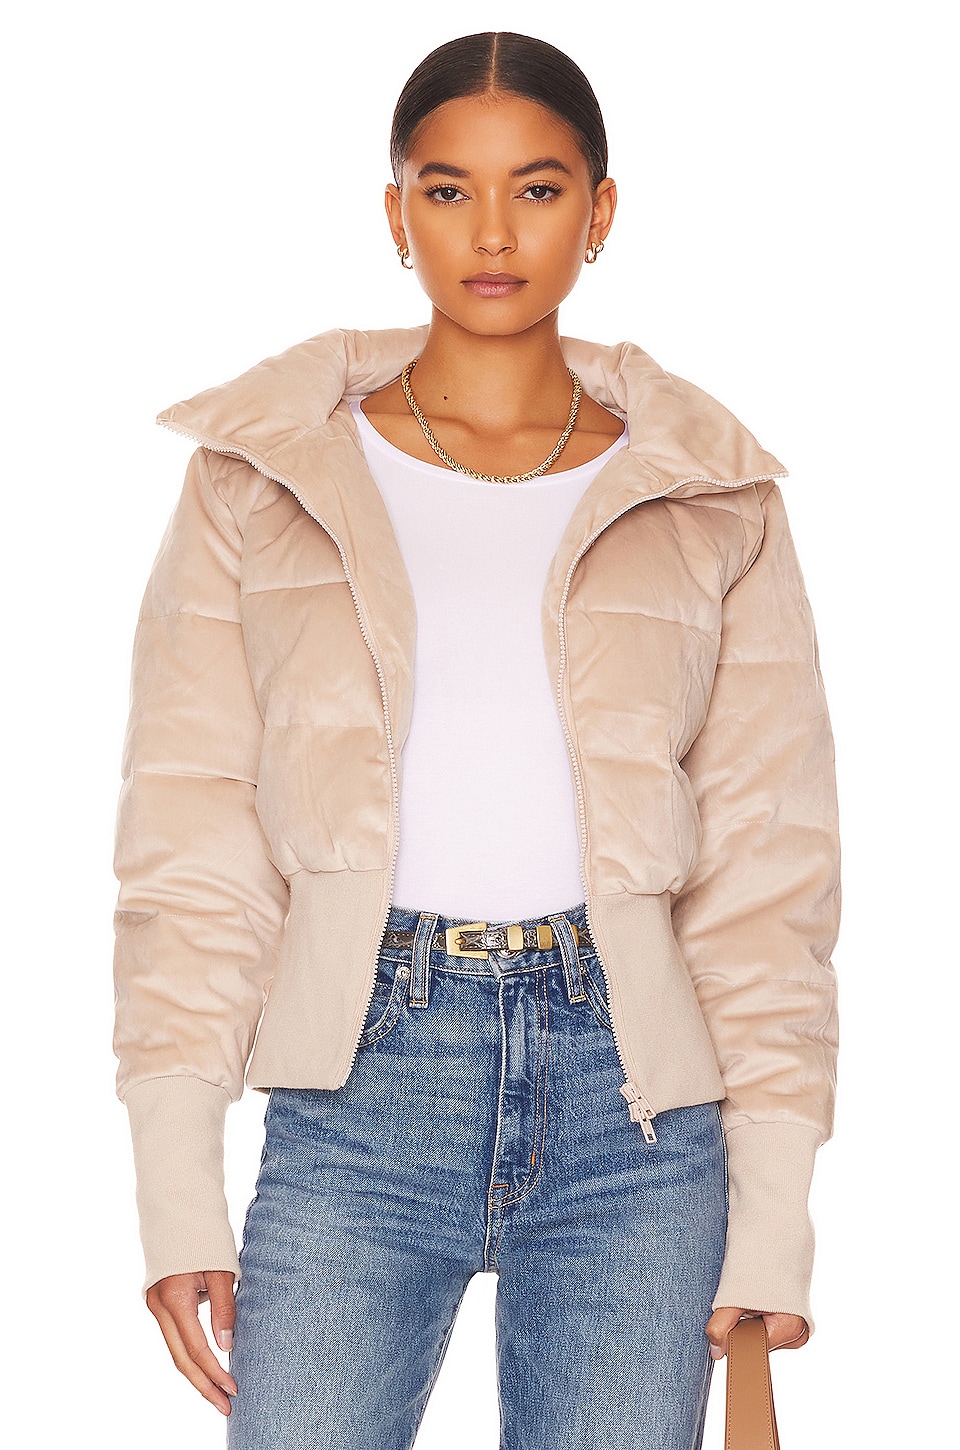 Unreal Fur New Amsterdam Jacket in Taupe | REVOLVE